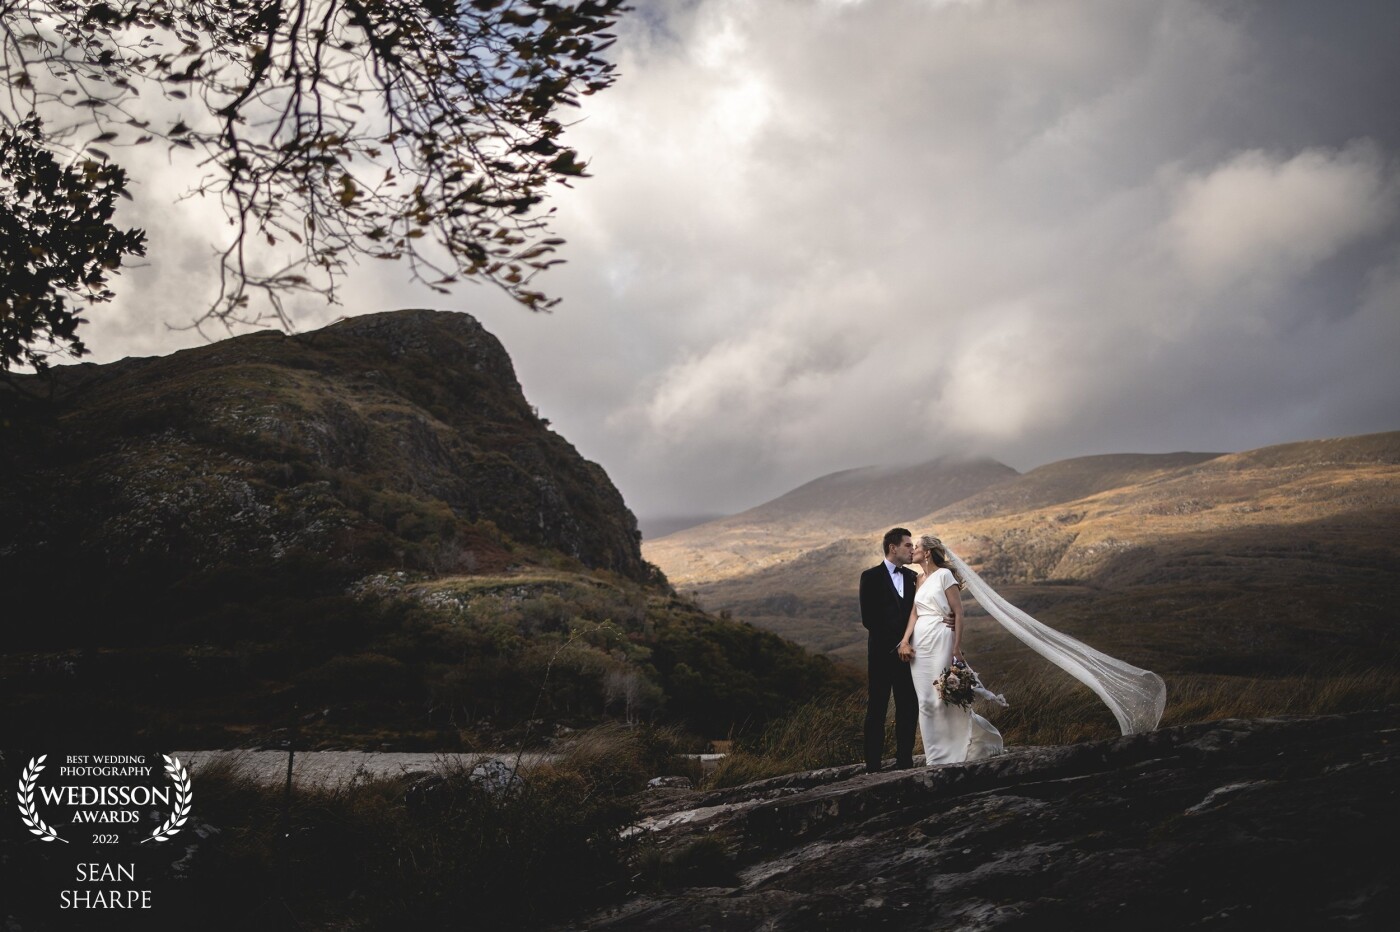 Holly and Philip in one of my favourite locations in Killarney. We were so lucky this day with the weather - it stopped raining when we started and started the minute we finished our session. That light, the couple - what a shoot!